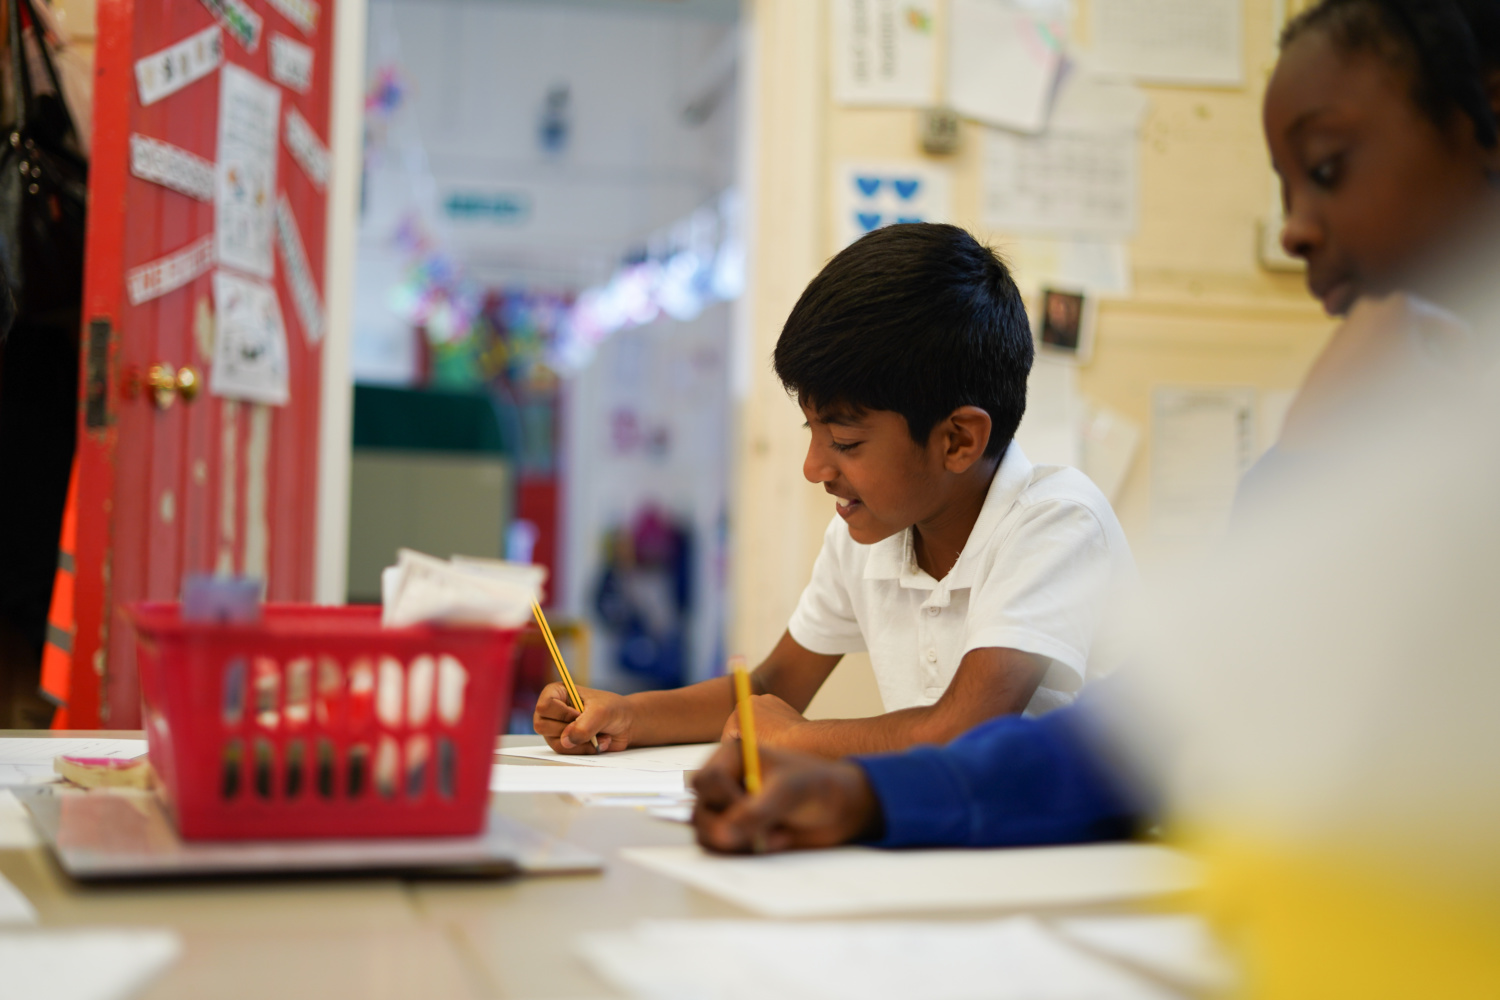 A young boy is seen sat at his desk, wearing his academy uniform with a bright smile on his face and focusing on his work.